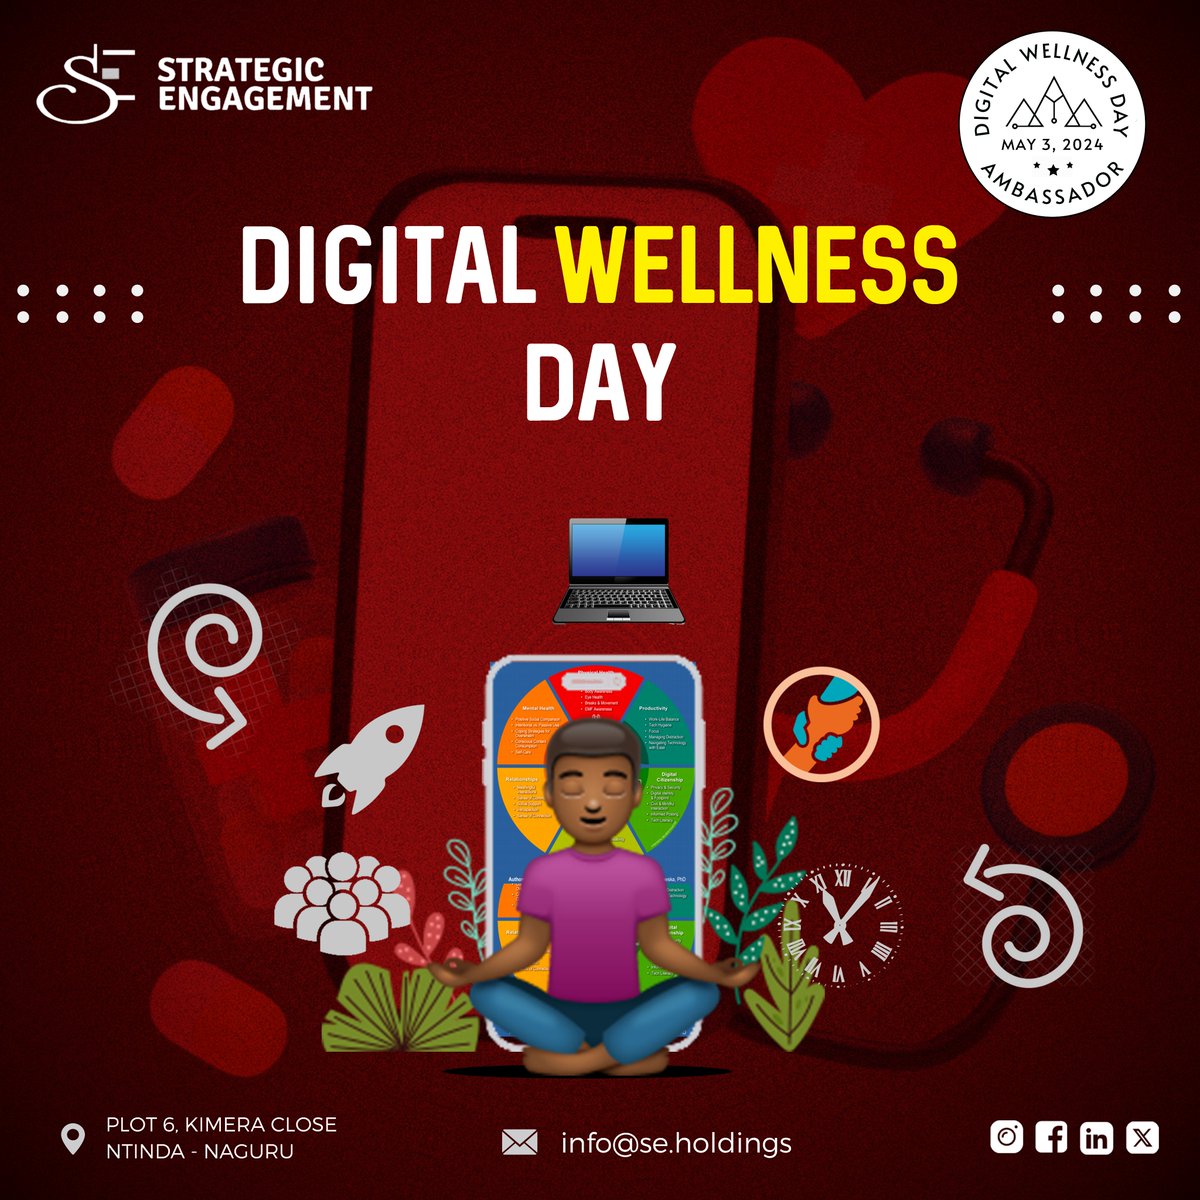 Celebrating the 5th Anniversary of Digital Wellness Day. Our team could not be more thrilled to celebrate this milestone with @digiwellinstit [DWI]. 
Read: linkedin.com/feed/update/ur…

#DigitalWellnessDay #TechBalance #WellnessJourney #DigitalWellnessDay #DigitalWellness #MindfulTech